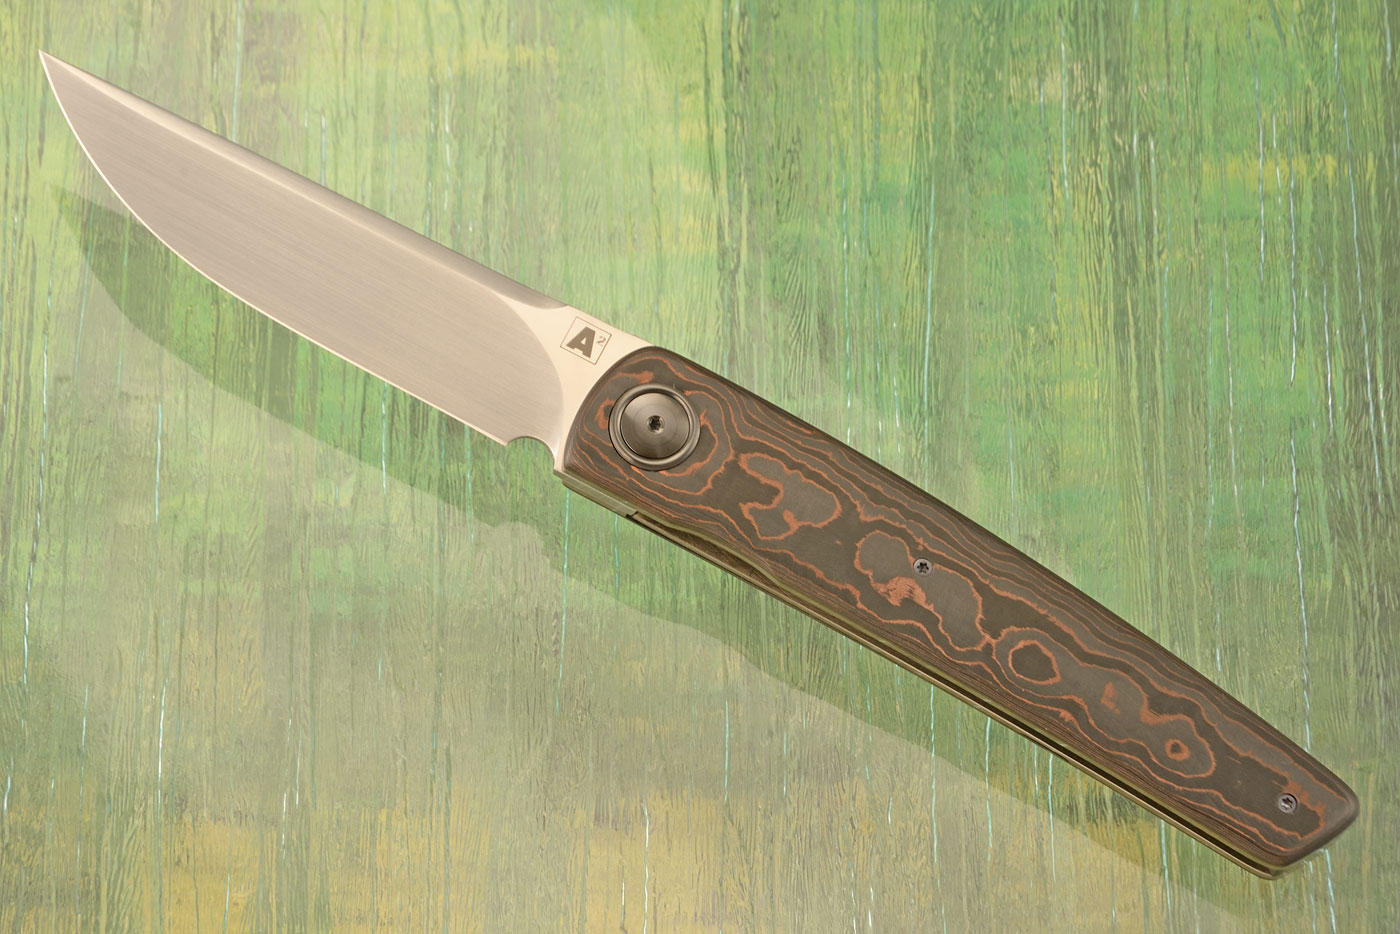 A10 Thiers Front Flipper with Copper Camo FatCarbon and Zirconium (Ceramic IKBS) - M390